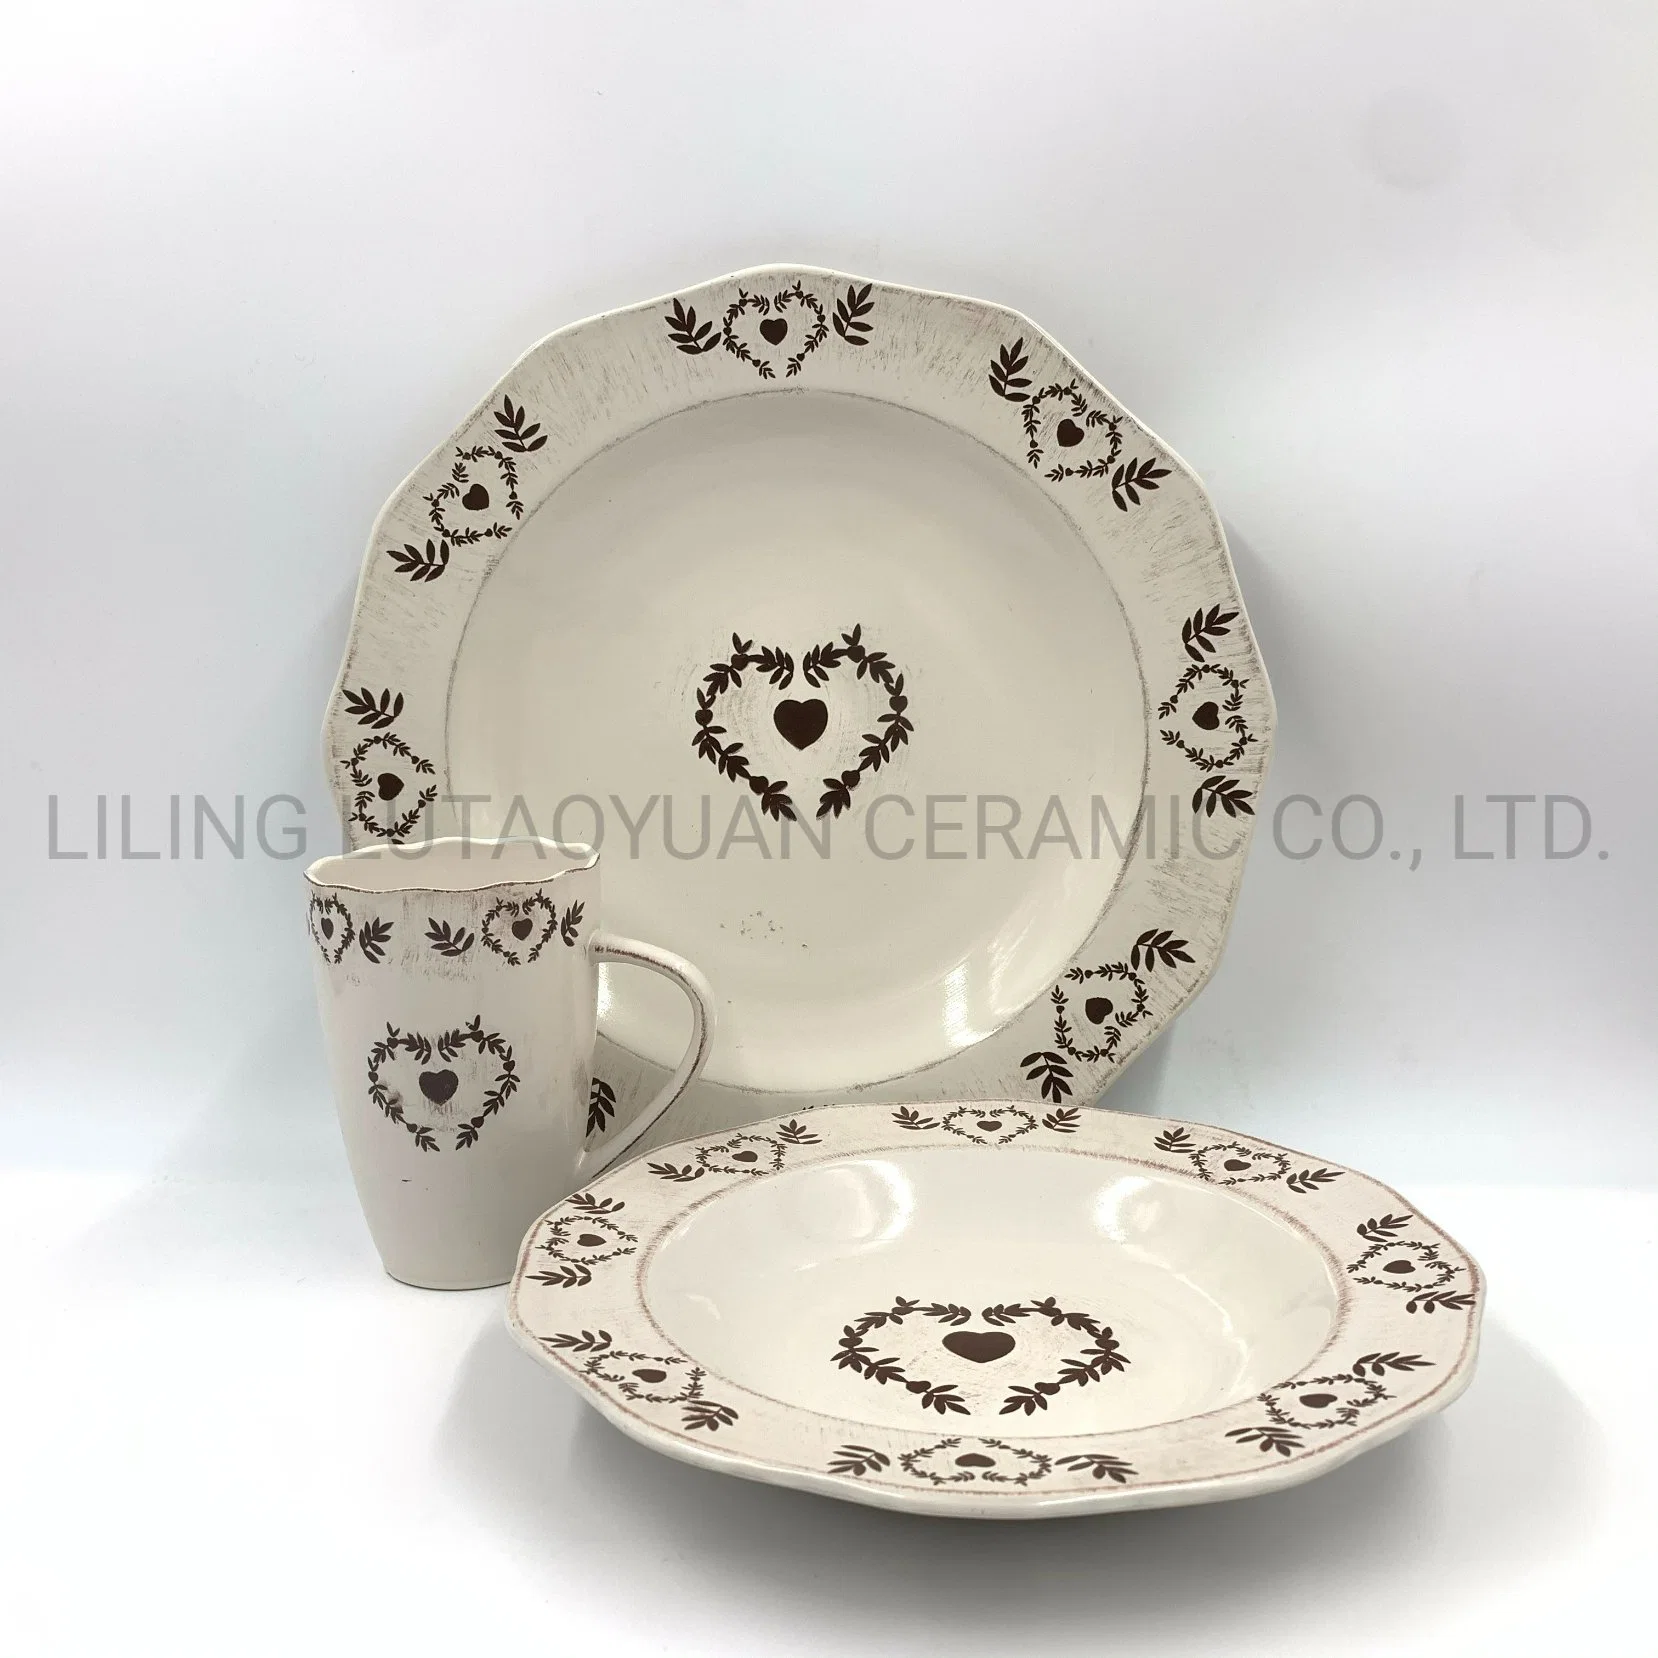 Stoneware Colored Promotion Hearts Porcelain Tableware Ceramic Dinner Set for Wedding Banquet Restaurant with Customized Color Pattern Logo and Designs